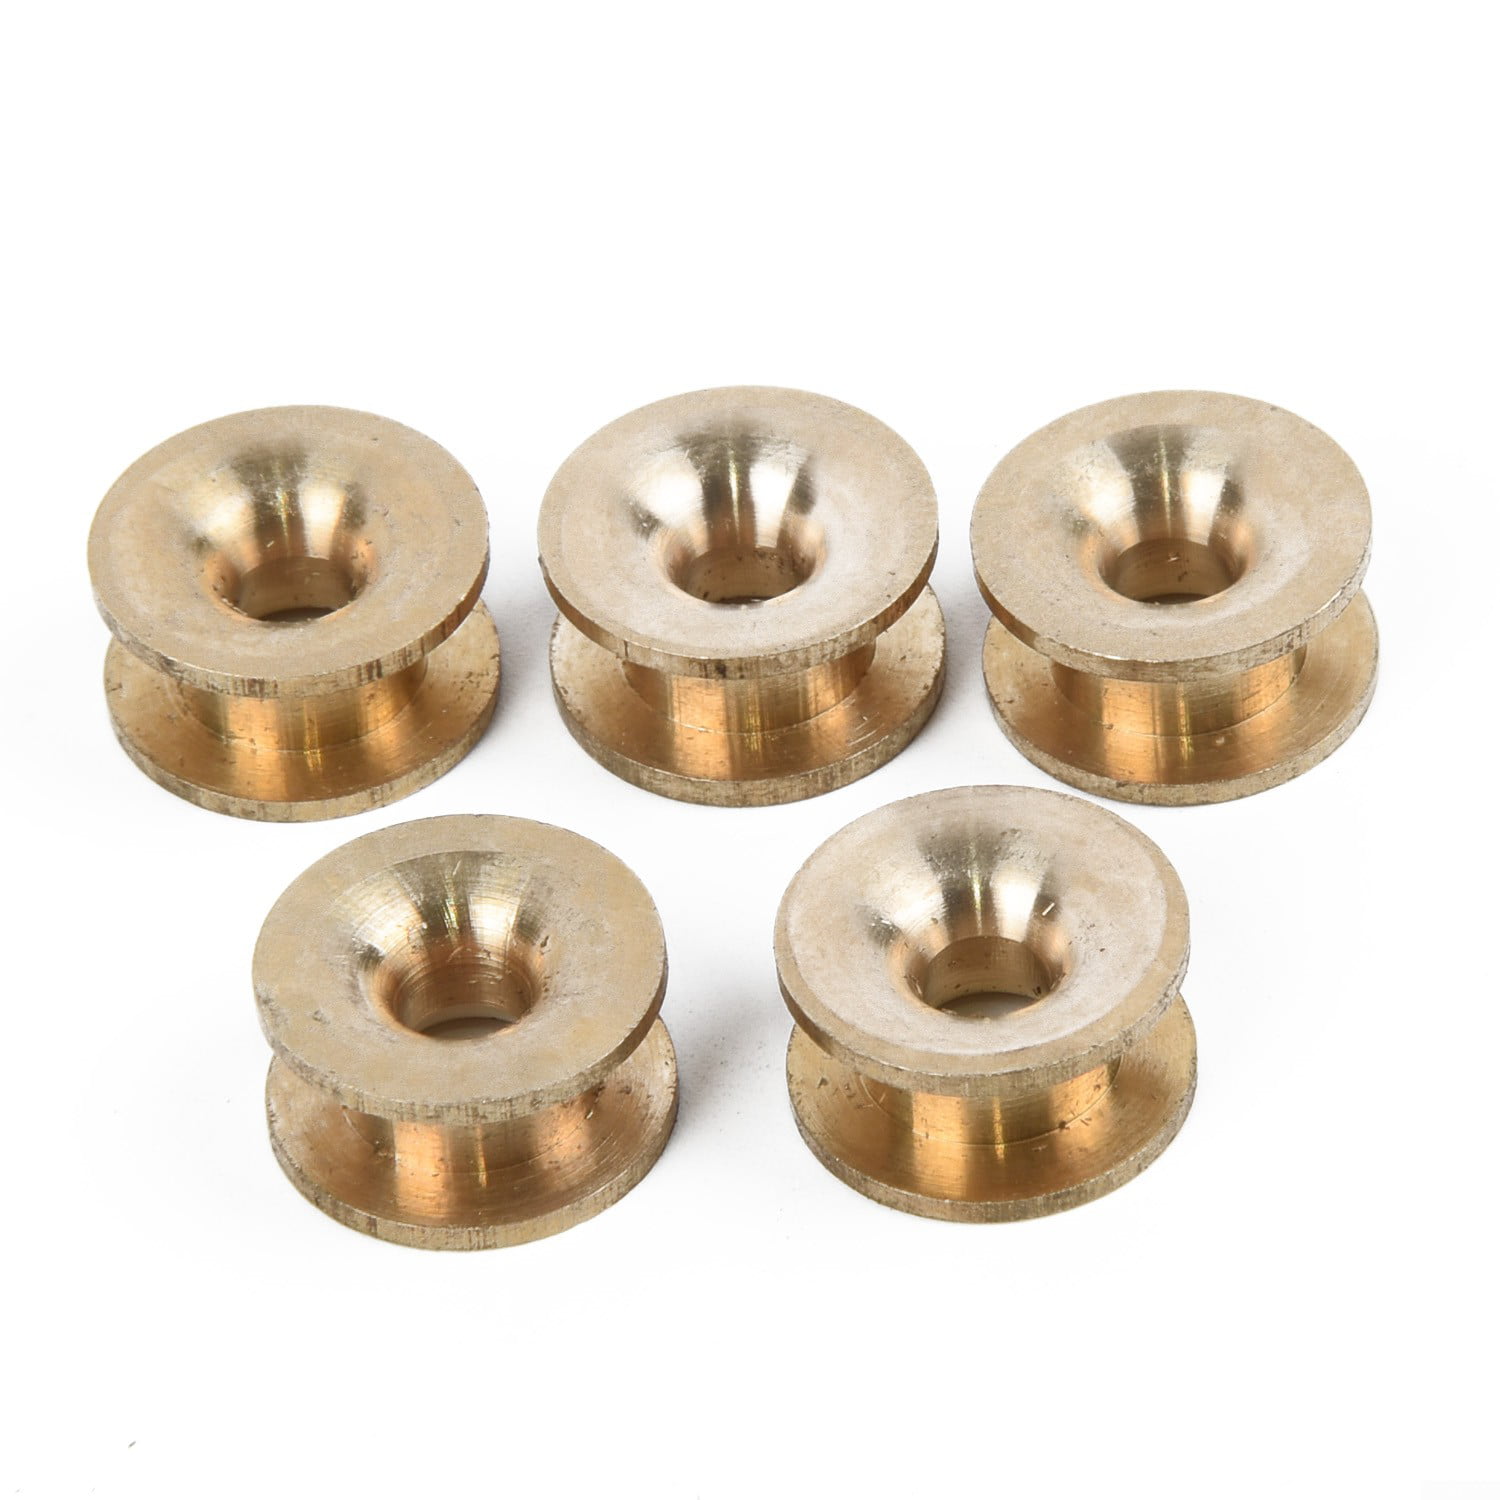 5 Pcs Replace Trimmer Head Eyelets Brush Cutter Strimmer Accessories Garden Tool 